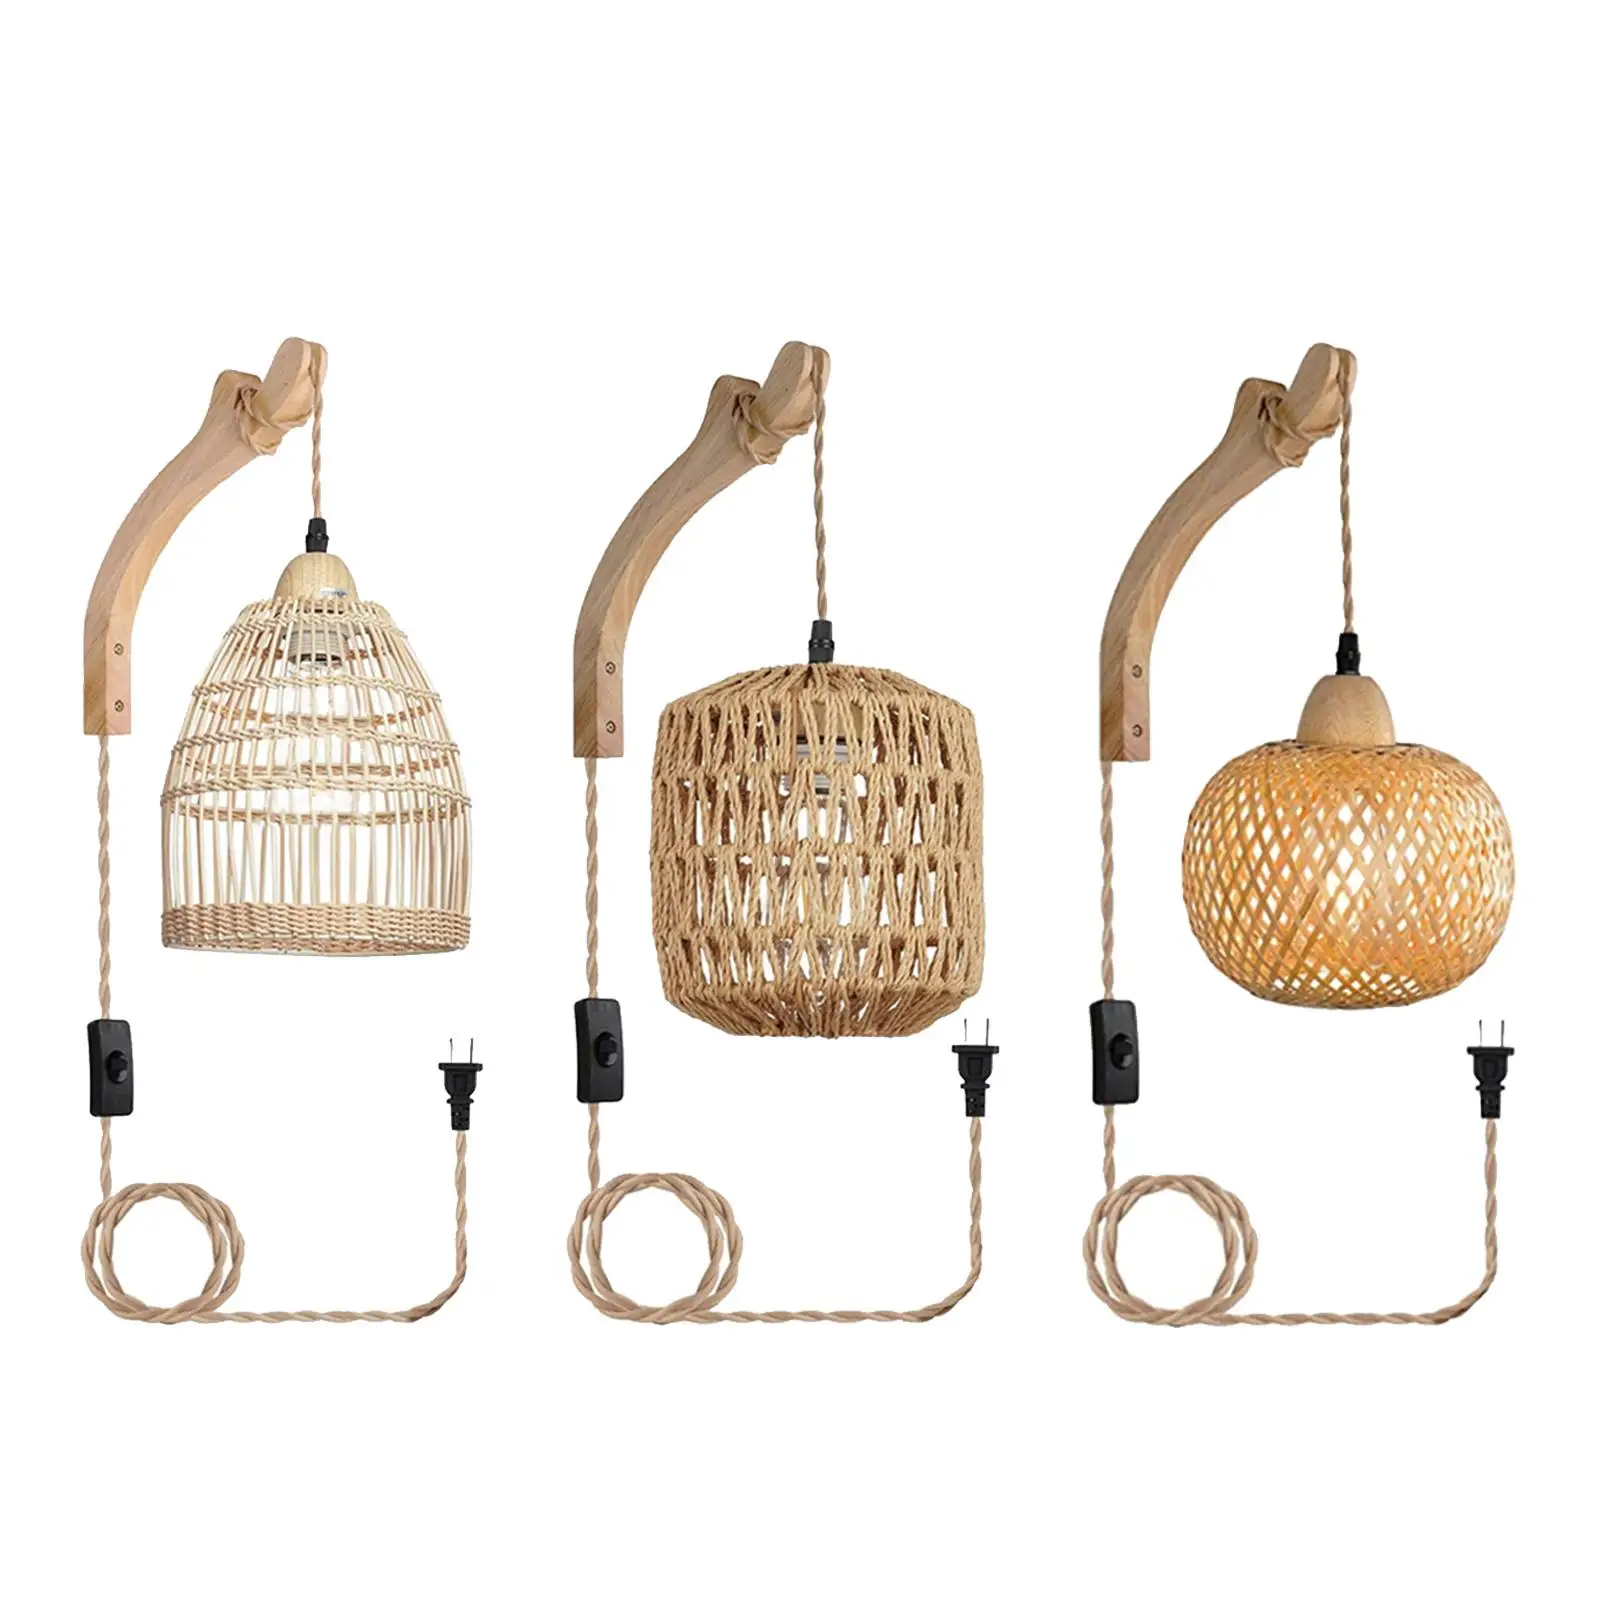 Woven Hanging Light Fixture 9.84ft Adjustable Cord Rustic Wall Sconces Plug in Pendant Lights Plug in Ceiling Light for Hall